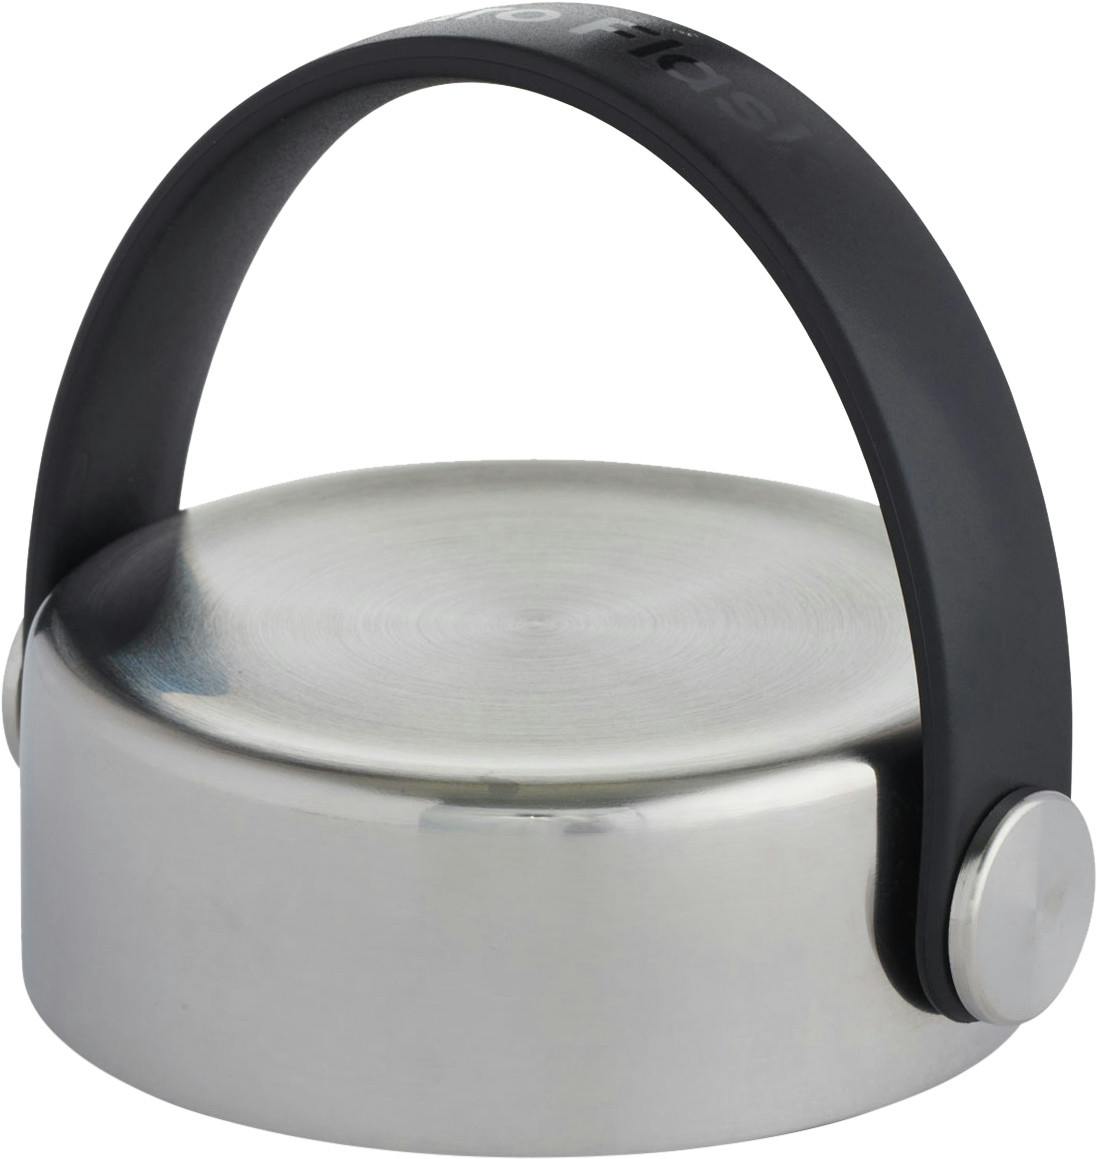 Wide Mouth Stainless Steel Cap Stainless